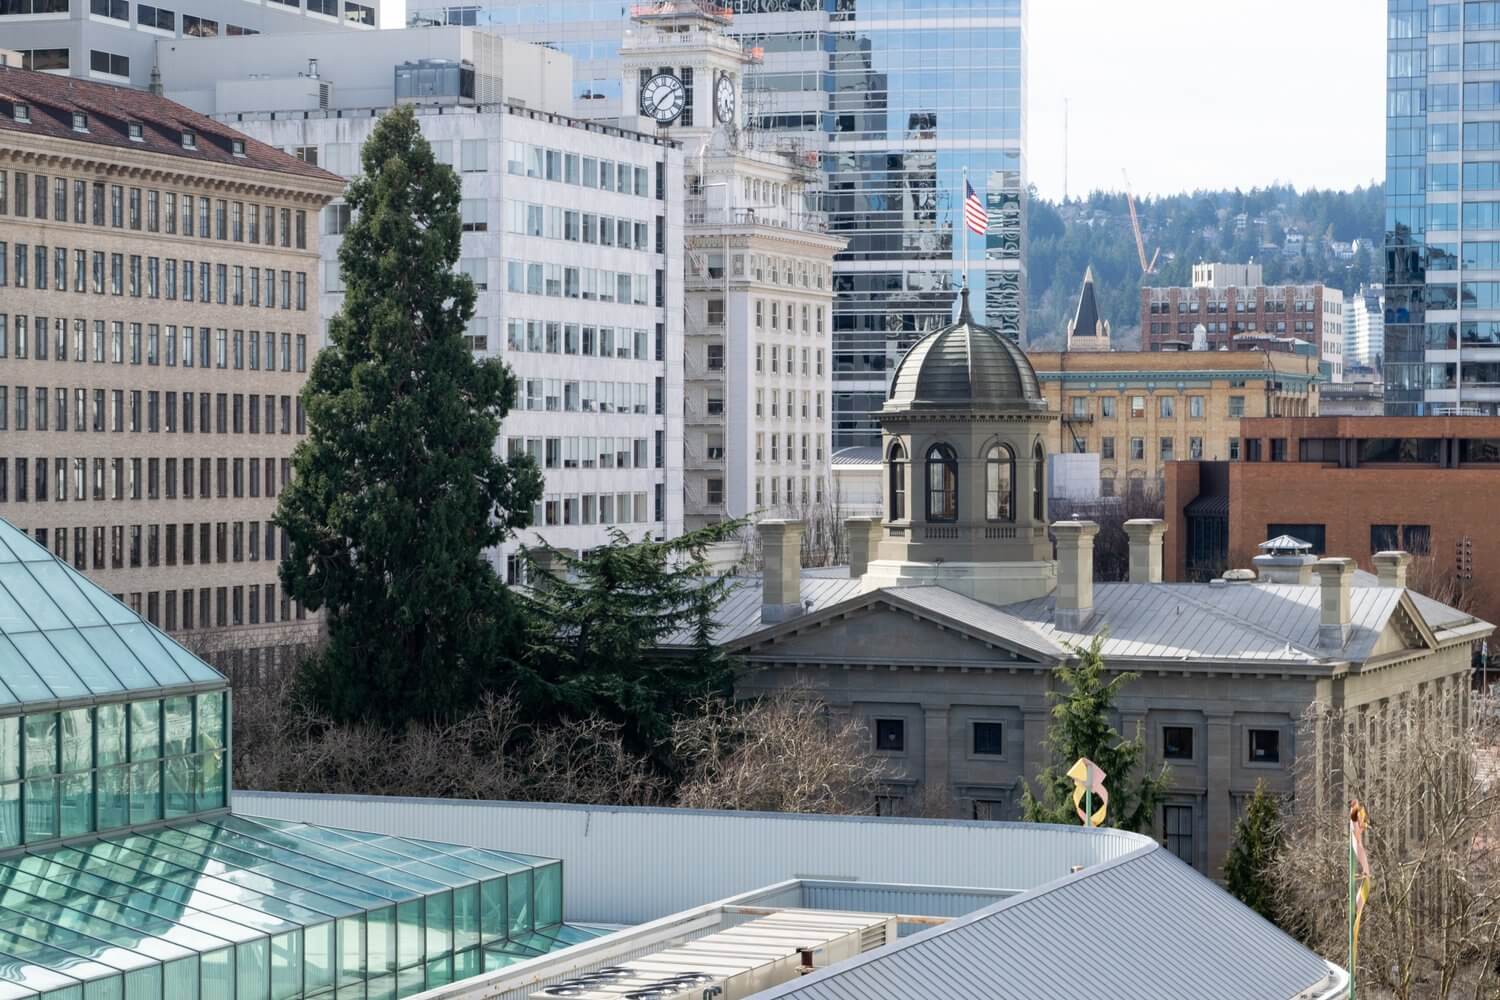 View of Pioneer Square Courthouse in Portland, Oregon